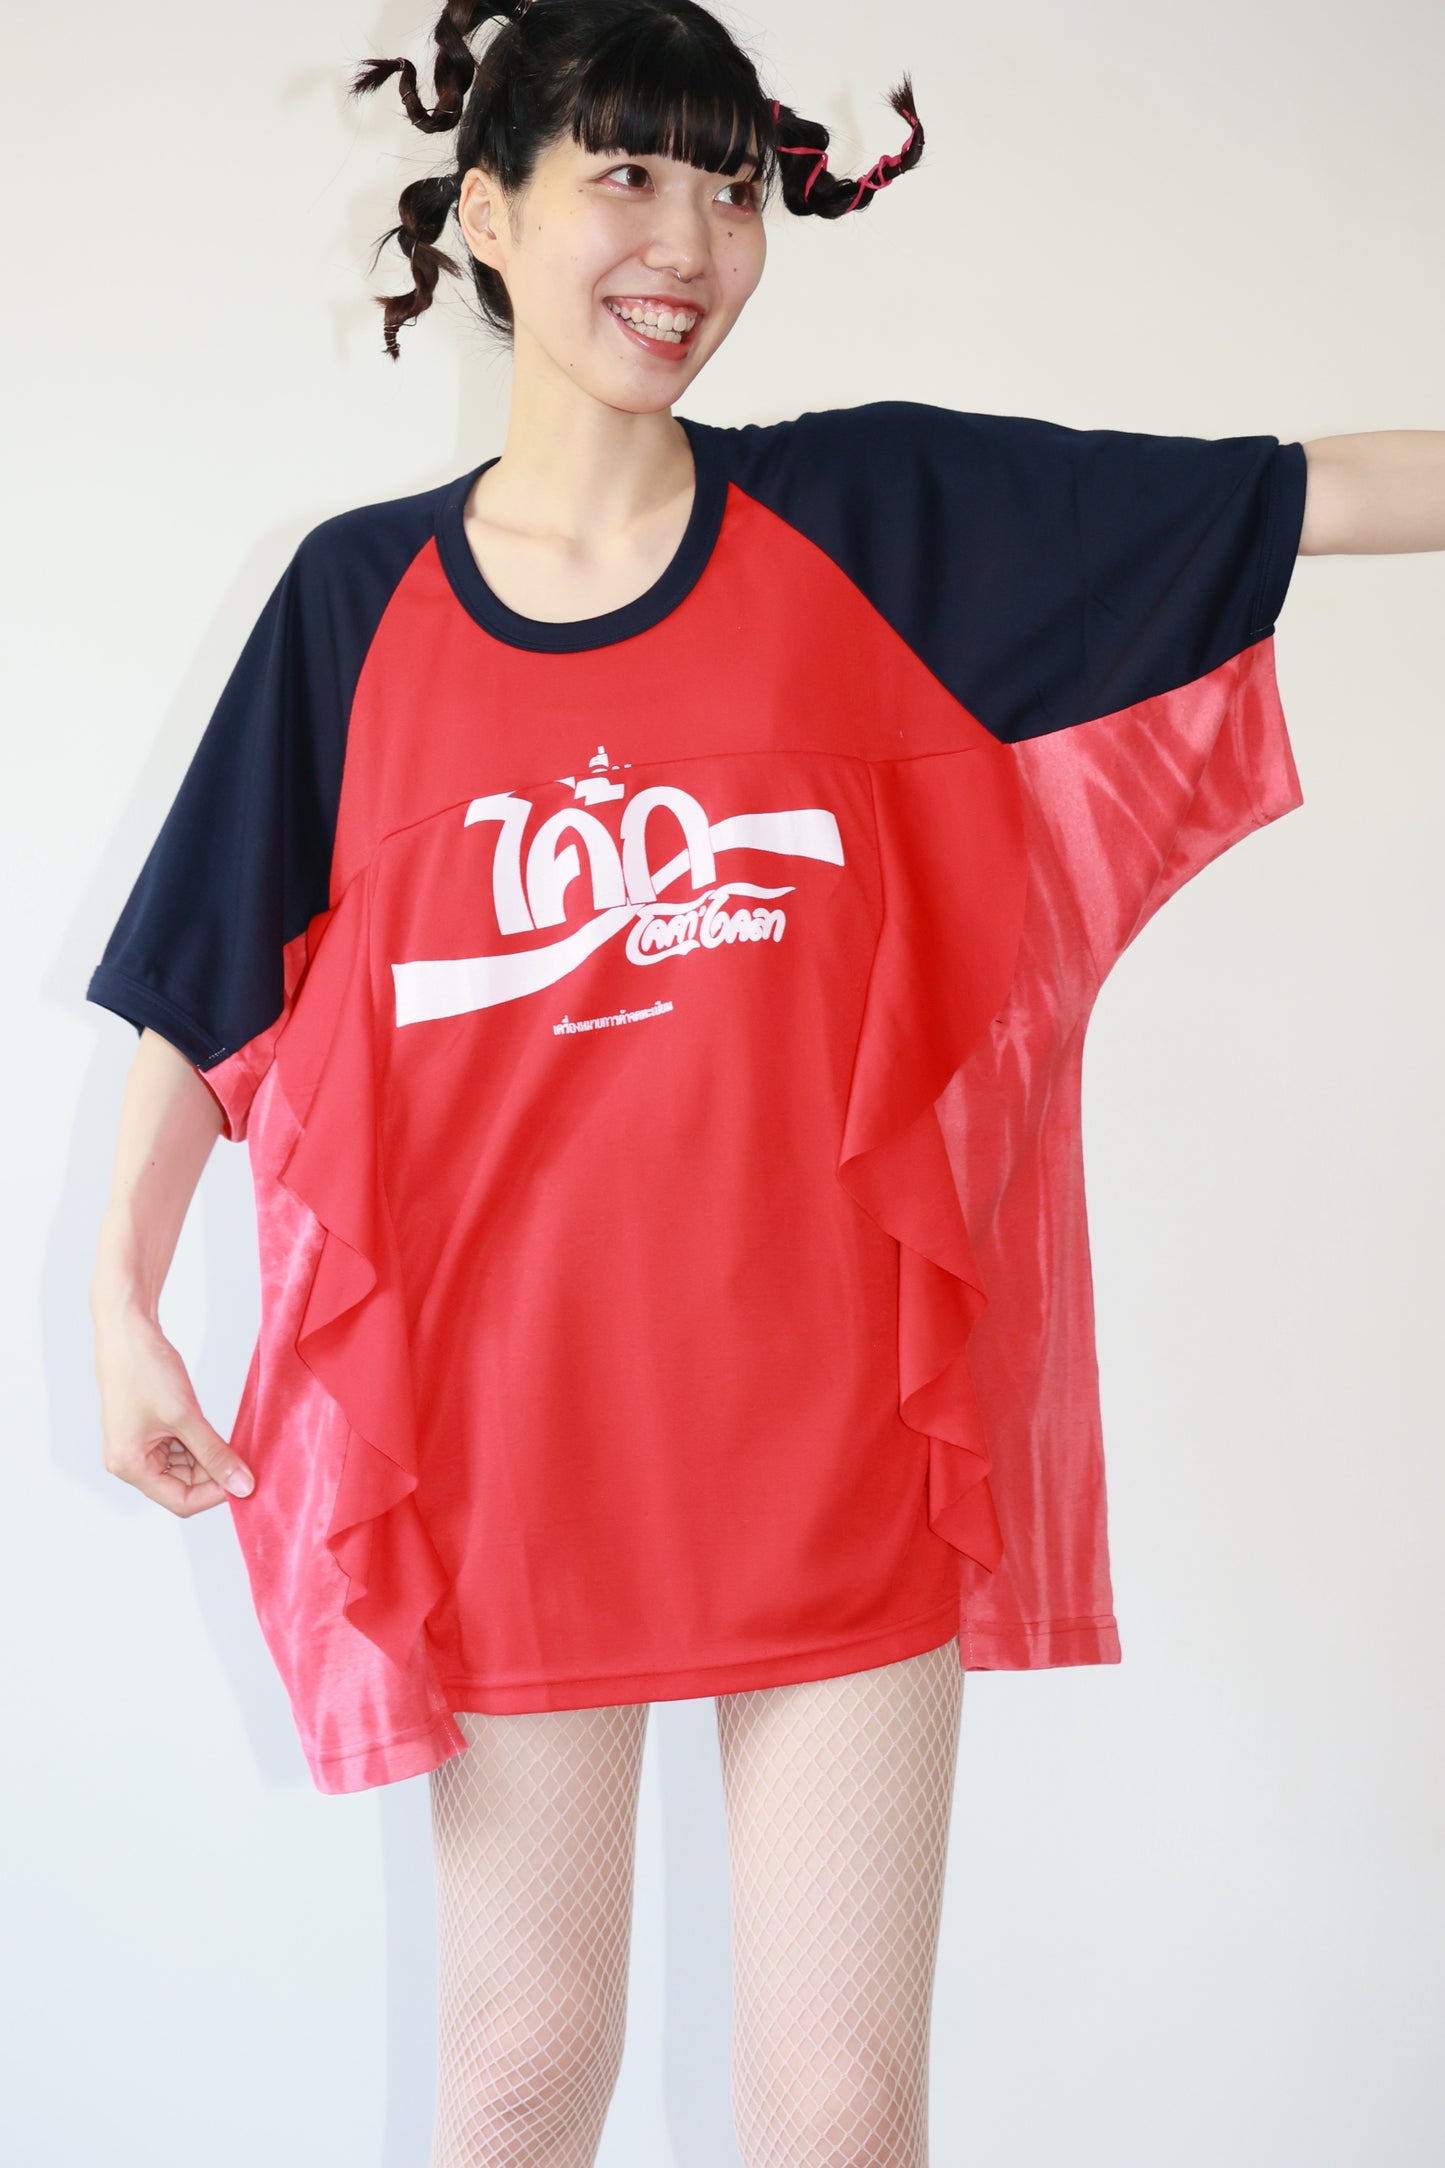 POTTOxUDW UP-CYCLED TIE-BLEACHED T-SHIRTS, RAGLAN RED